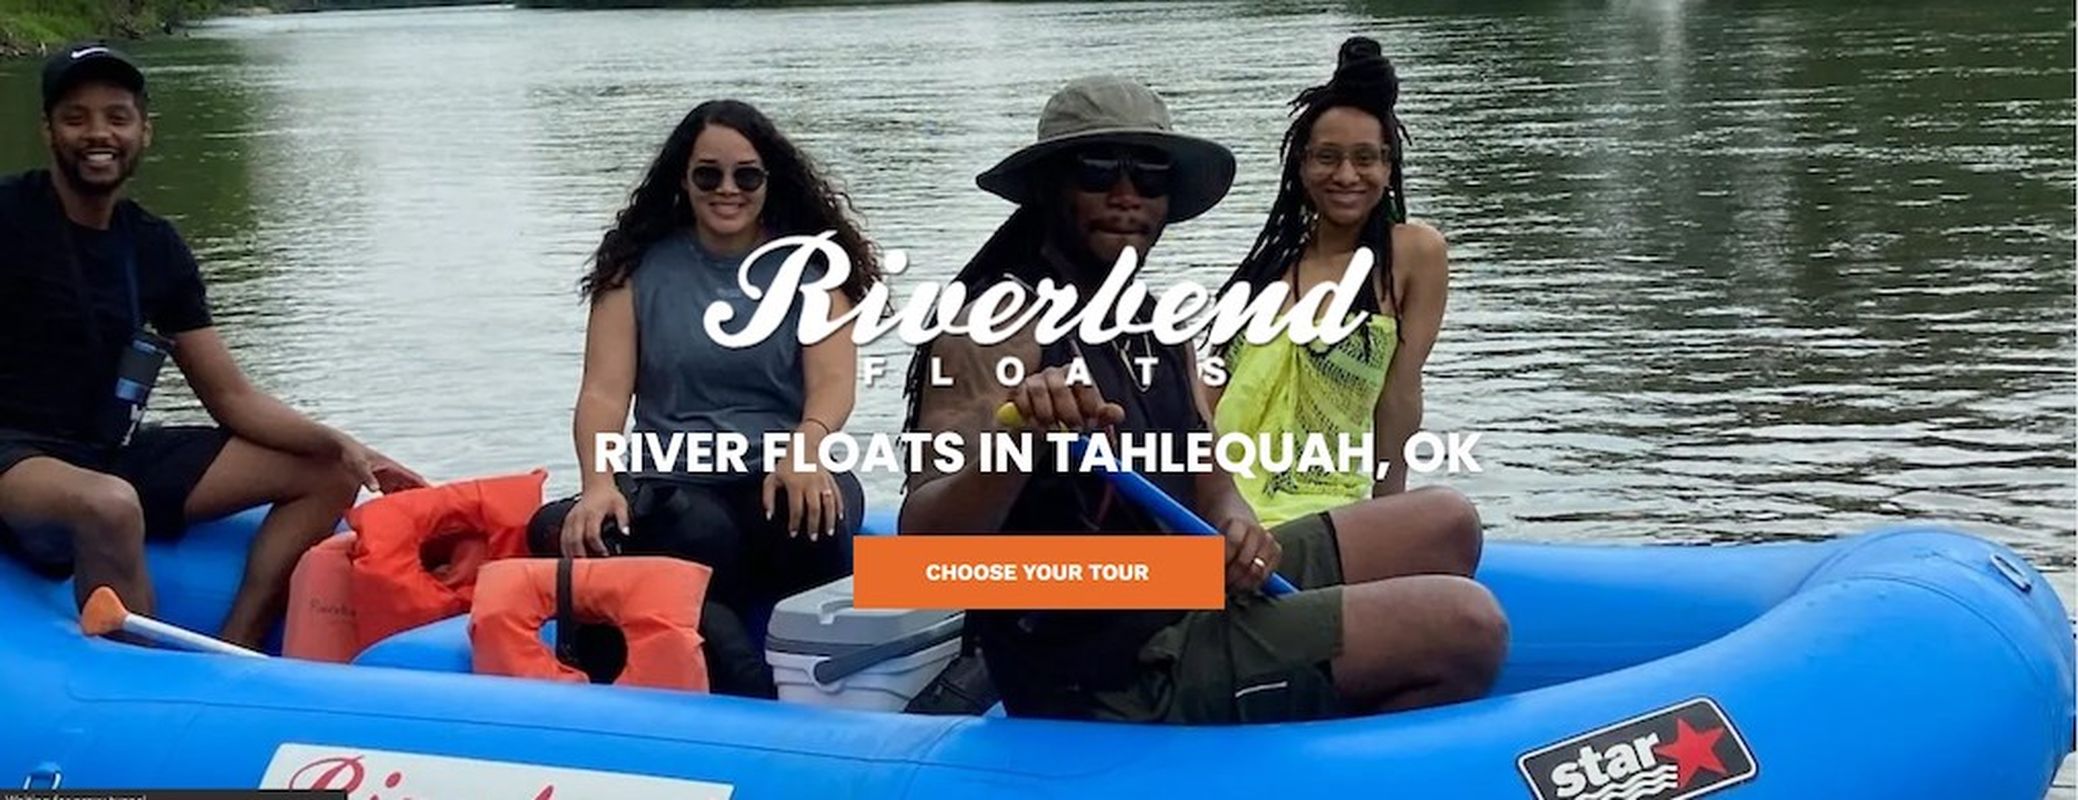 Riverbend Floats   - Oklahoma's Official Travel & Tourism Site